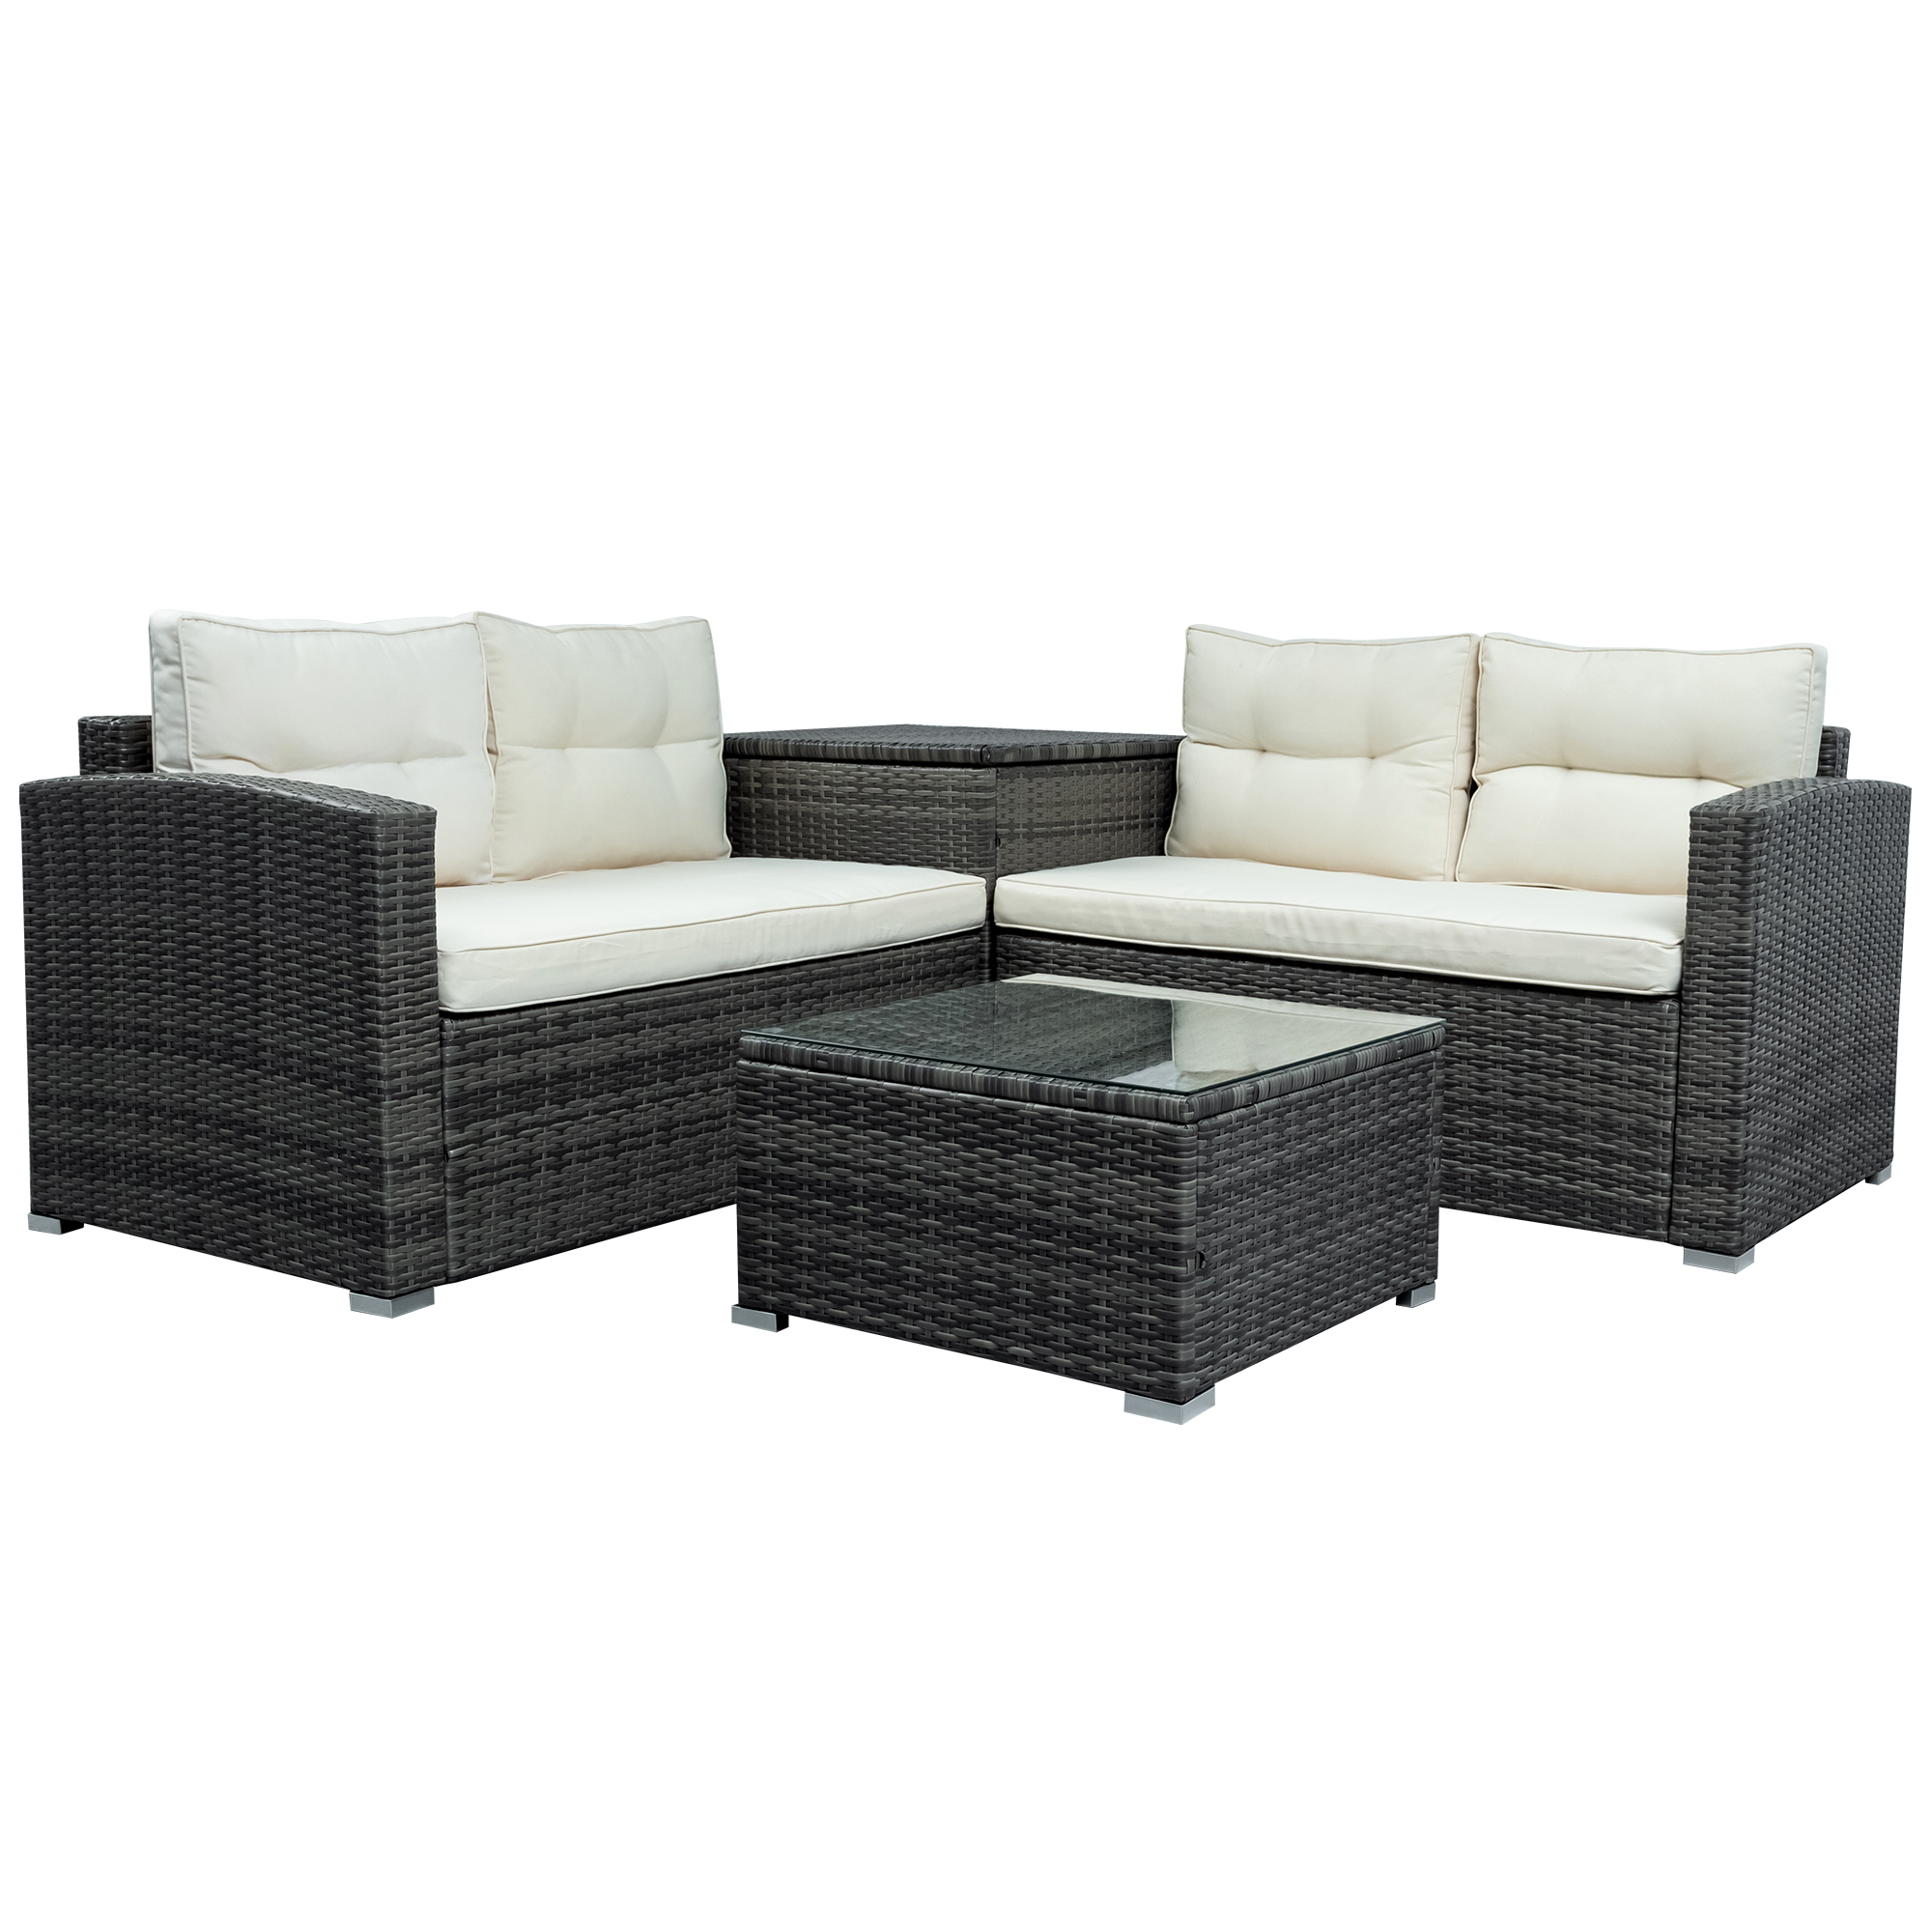 Outdoor Patio Chairs & Seating Sets Furniture for Outdoor Patio, 4-Piece Wicker Conversation Set w/L-Seats Sofa, R-Seats Sofa, Cushion box, Tempered Glass Dining Table, Padded Cushions, S9156 - image 3 of 10